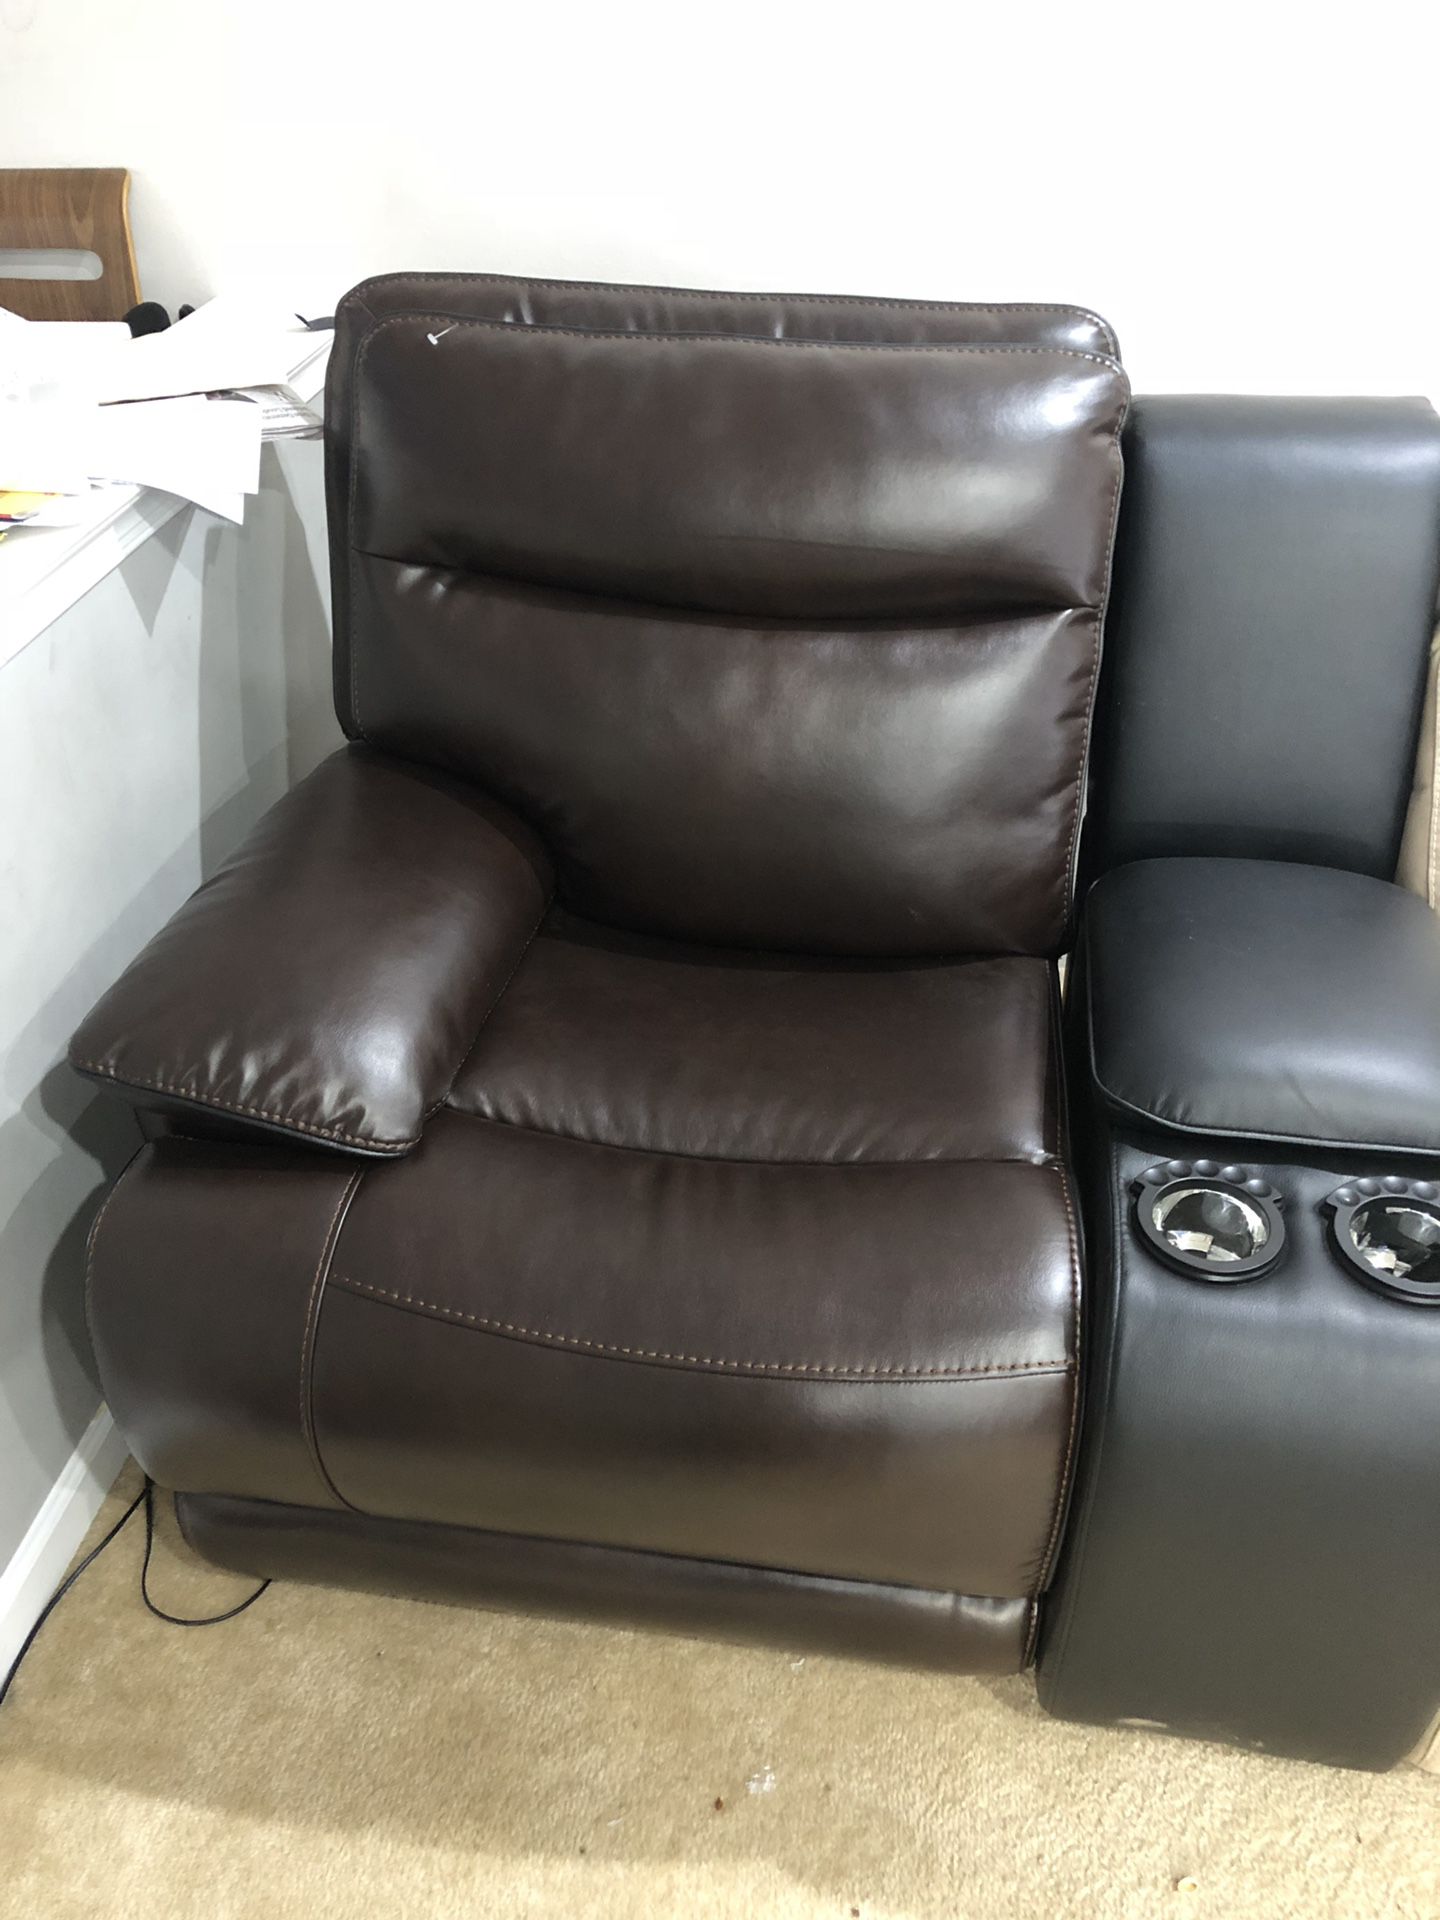 Brand new recliner chair with console cup holders and hidden storage for sale